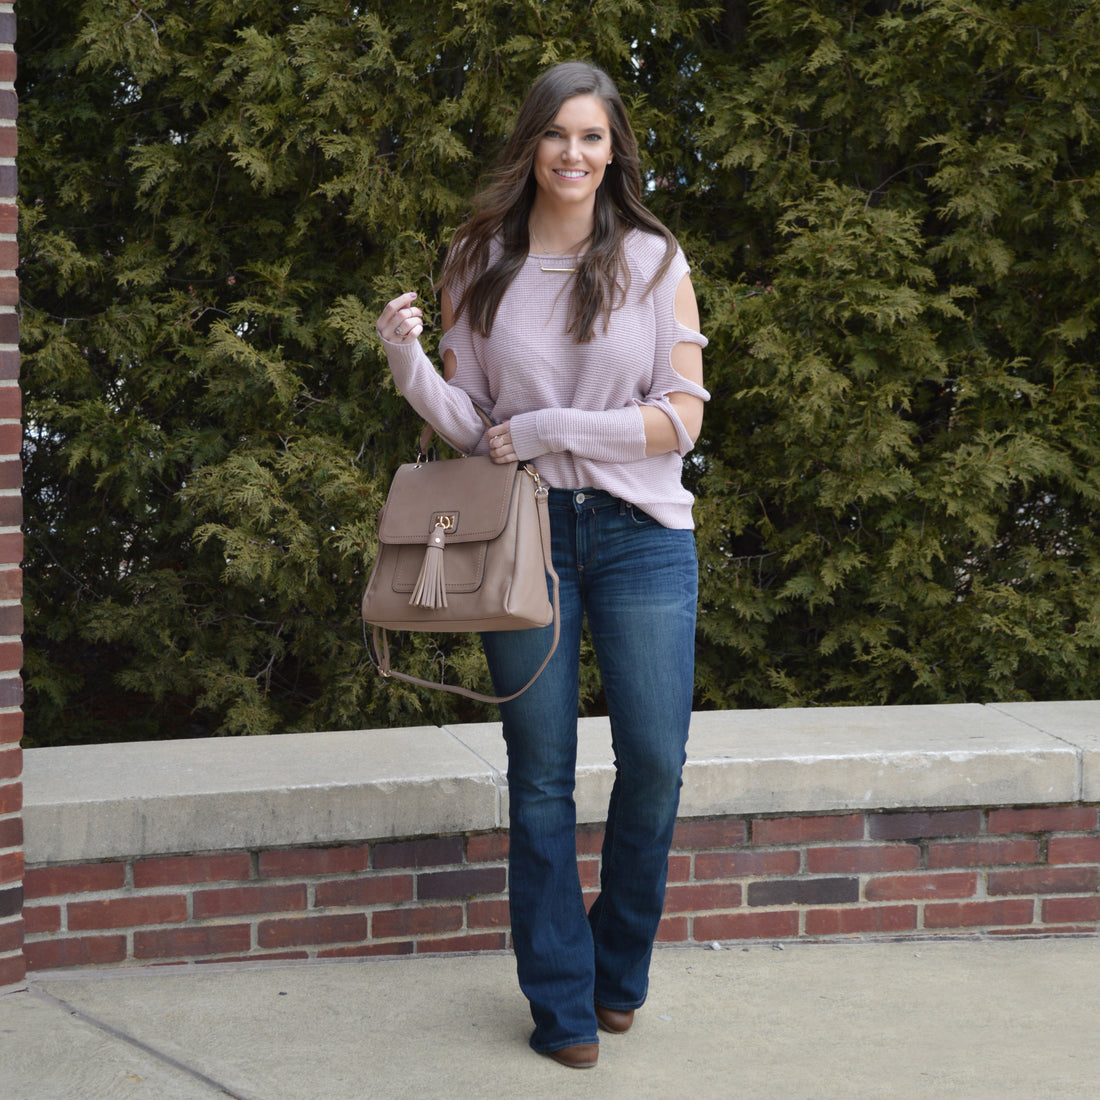 Flared Jeans in a Casual Winter Outfit